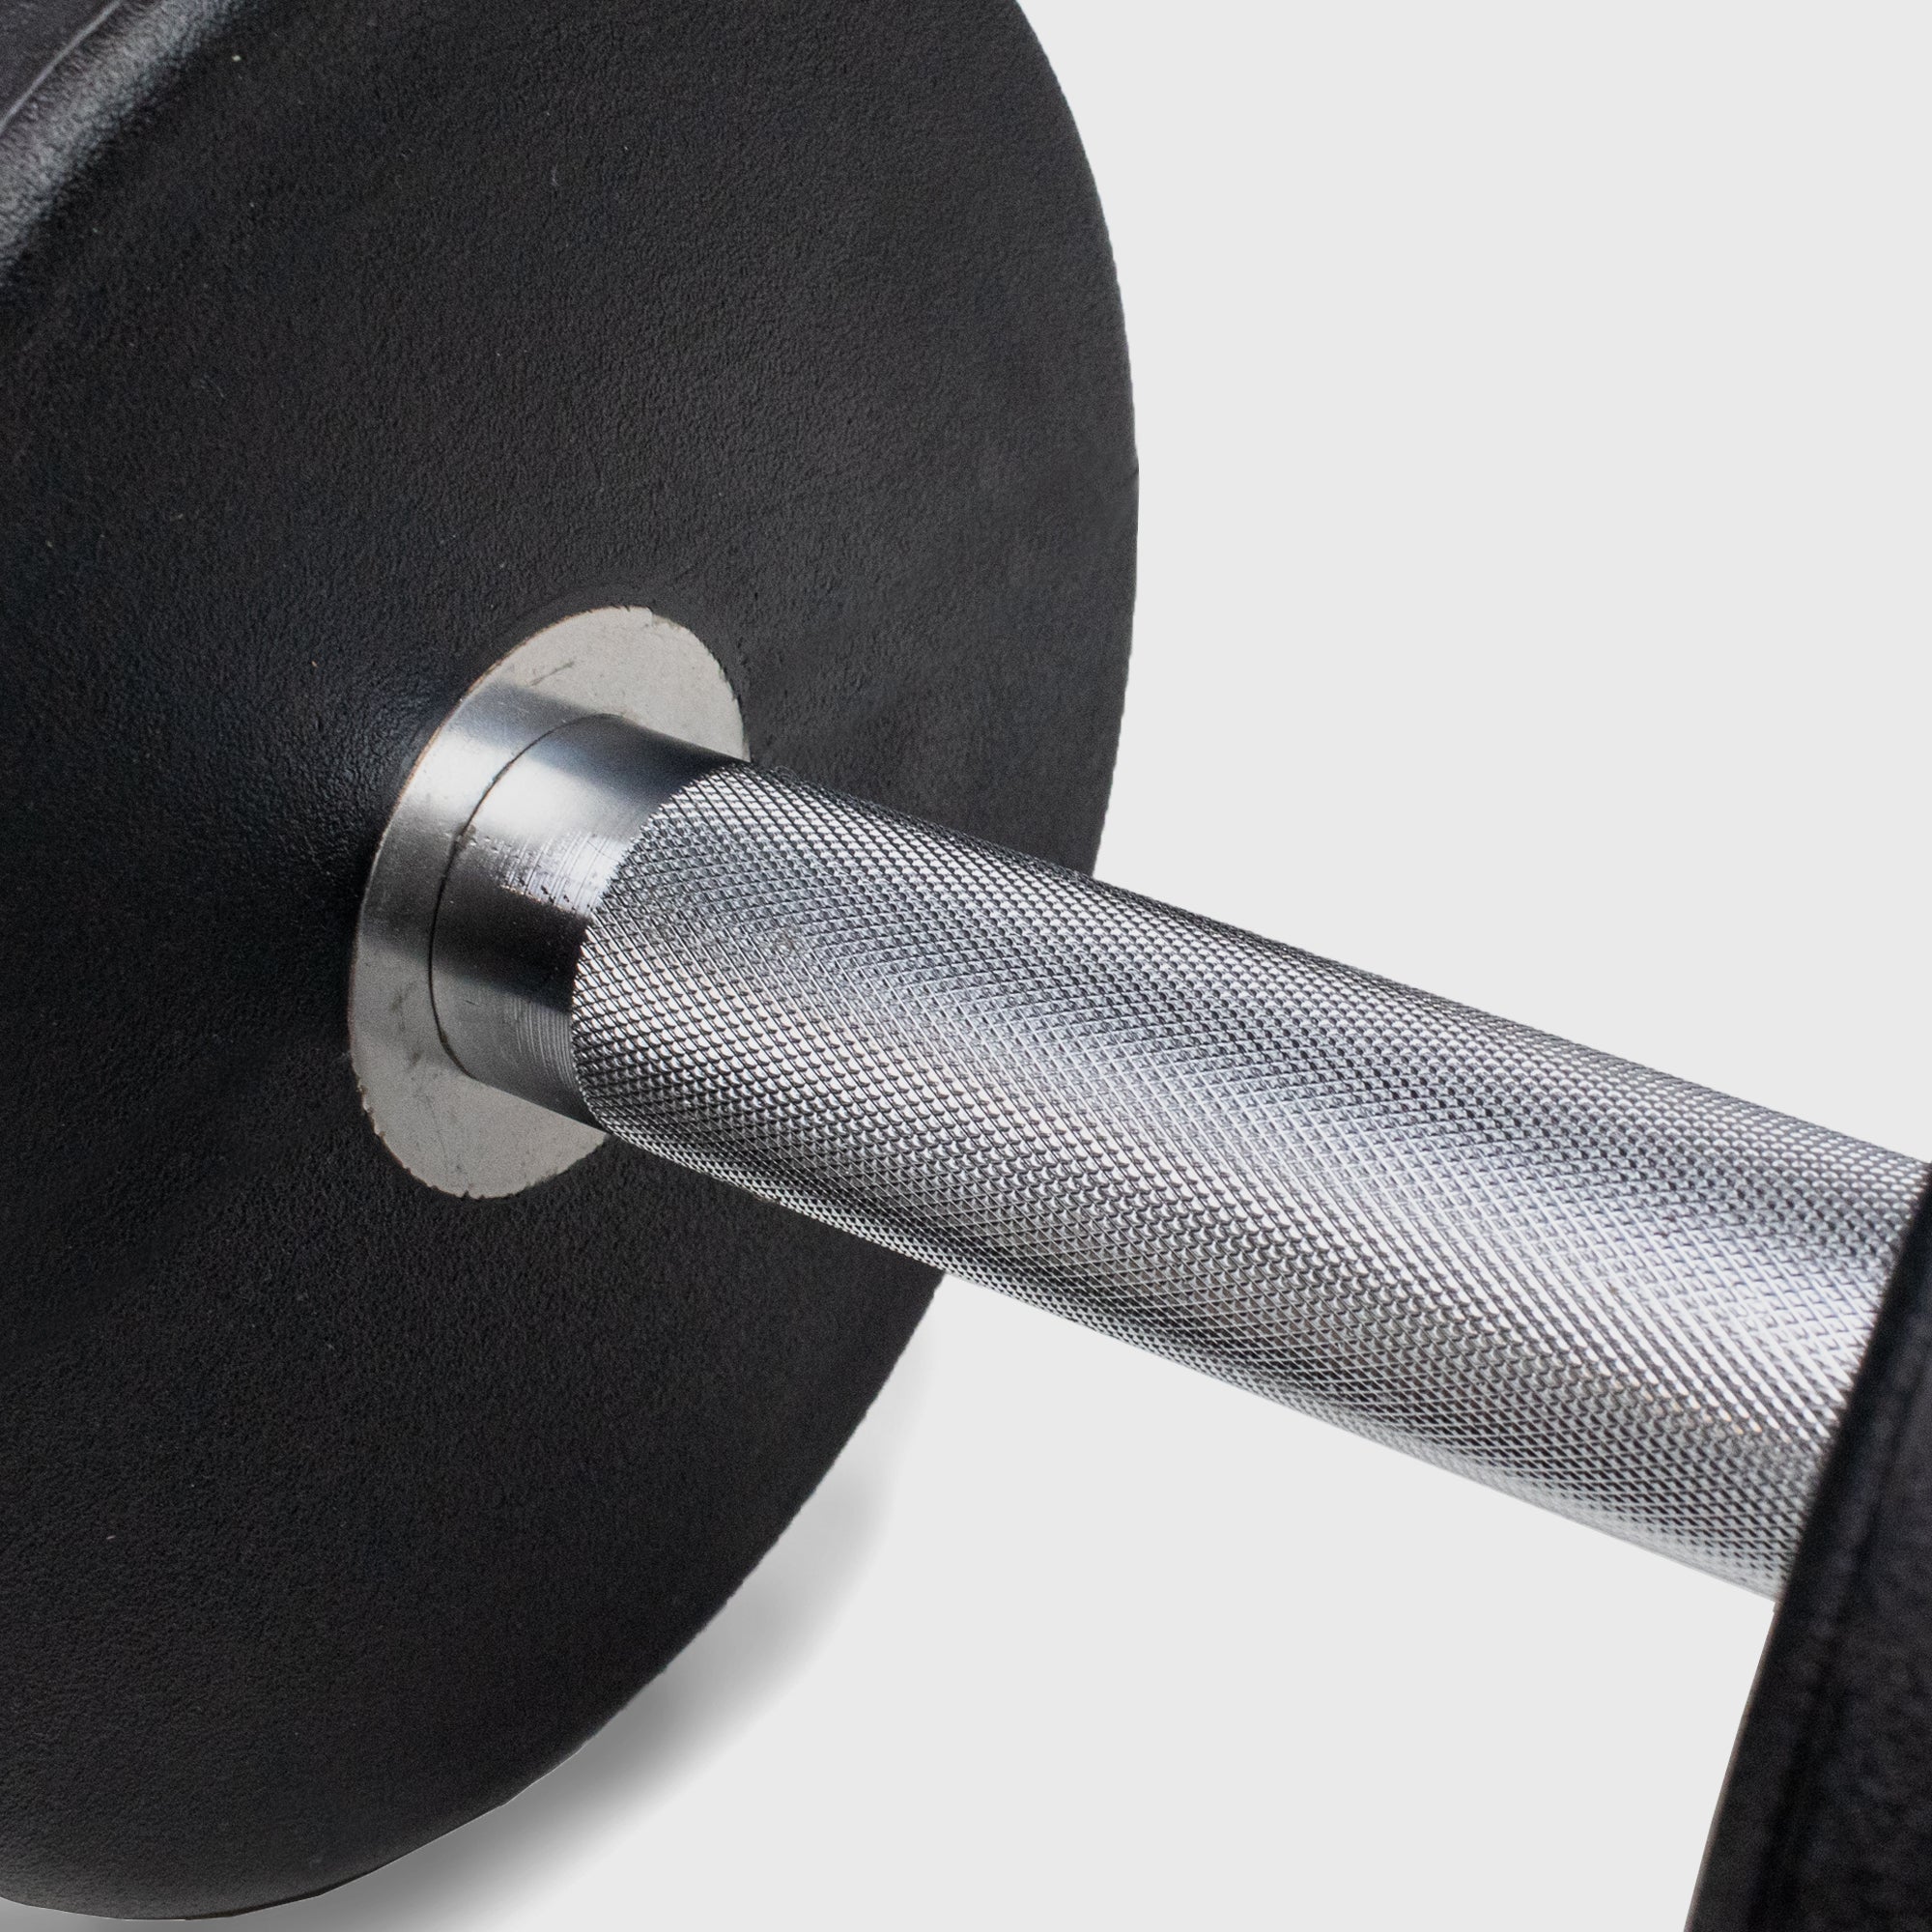 10KG Fixed Weight Dumbbell - handle detail